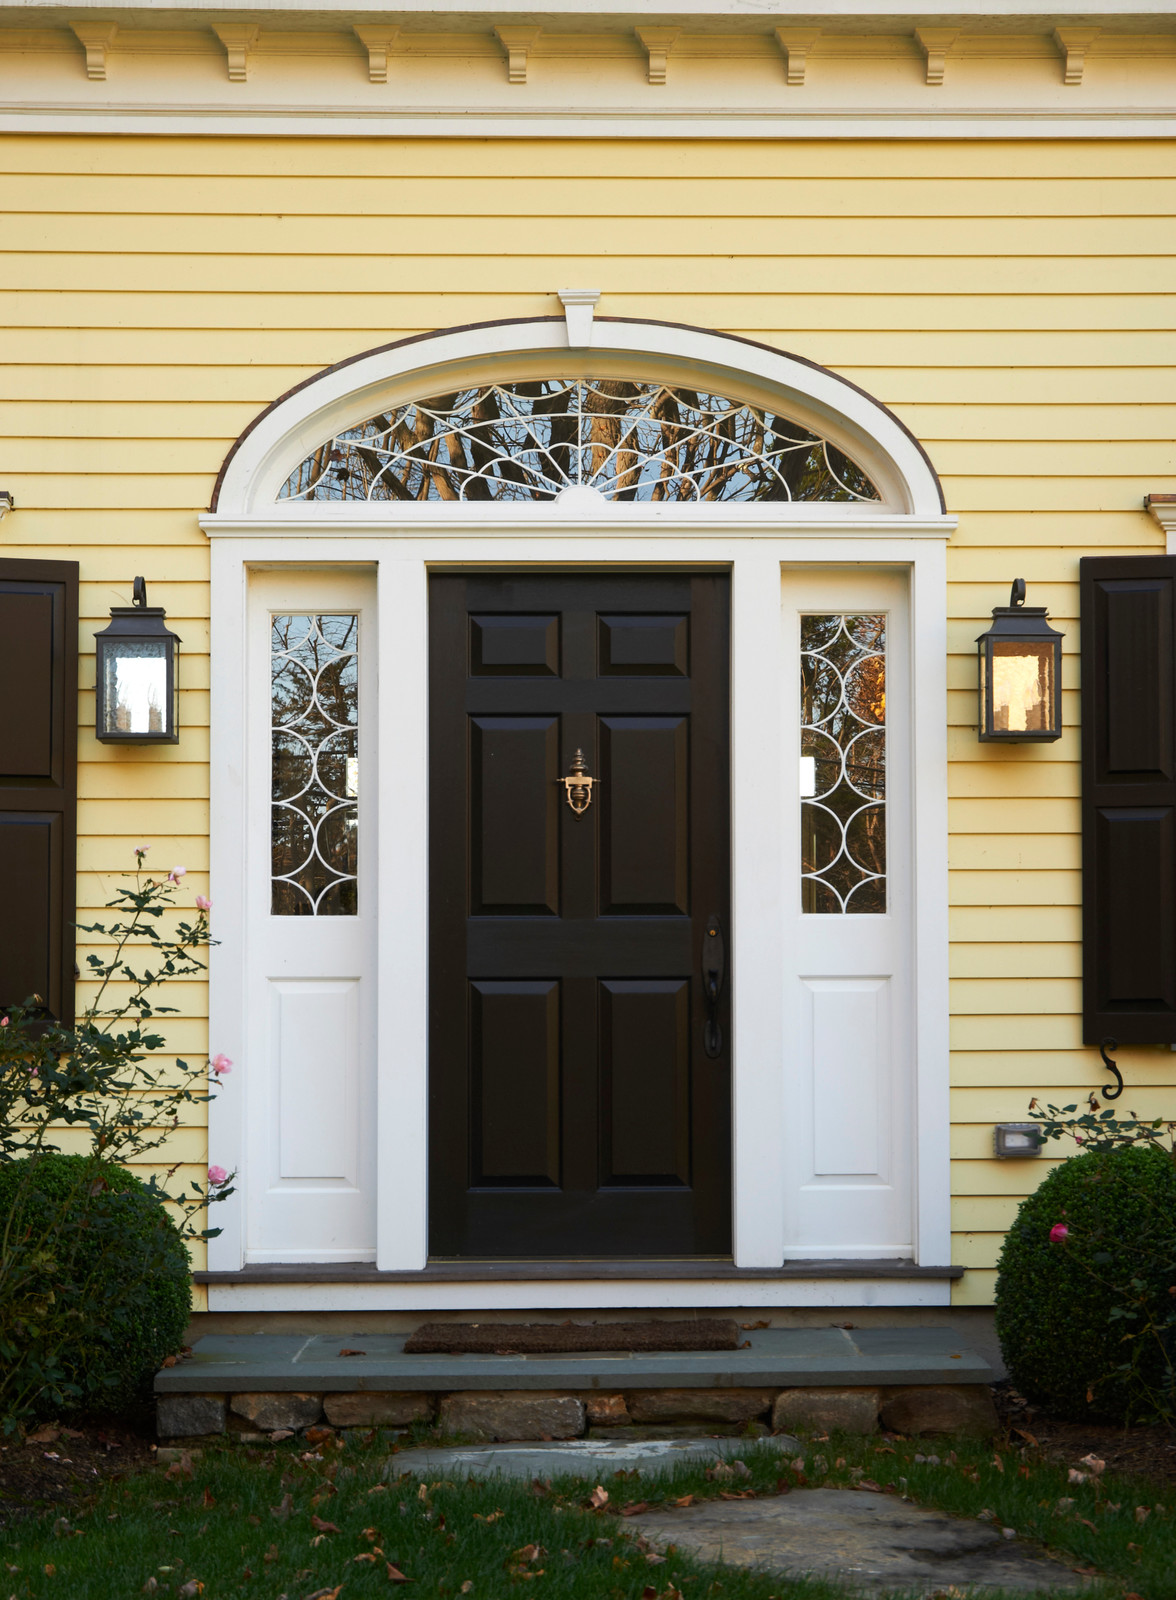 Front Door With Transom Above Designs, Entry Doors With Sidelights And Transom